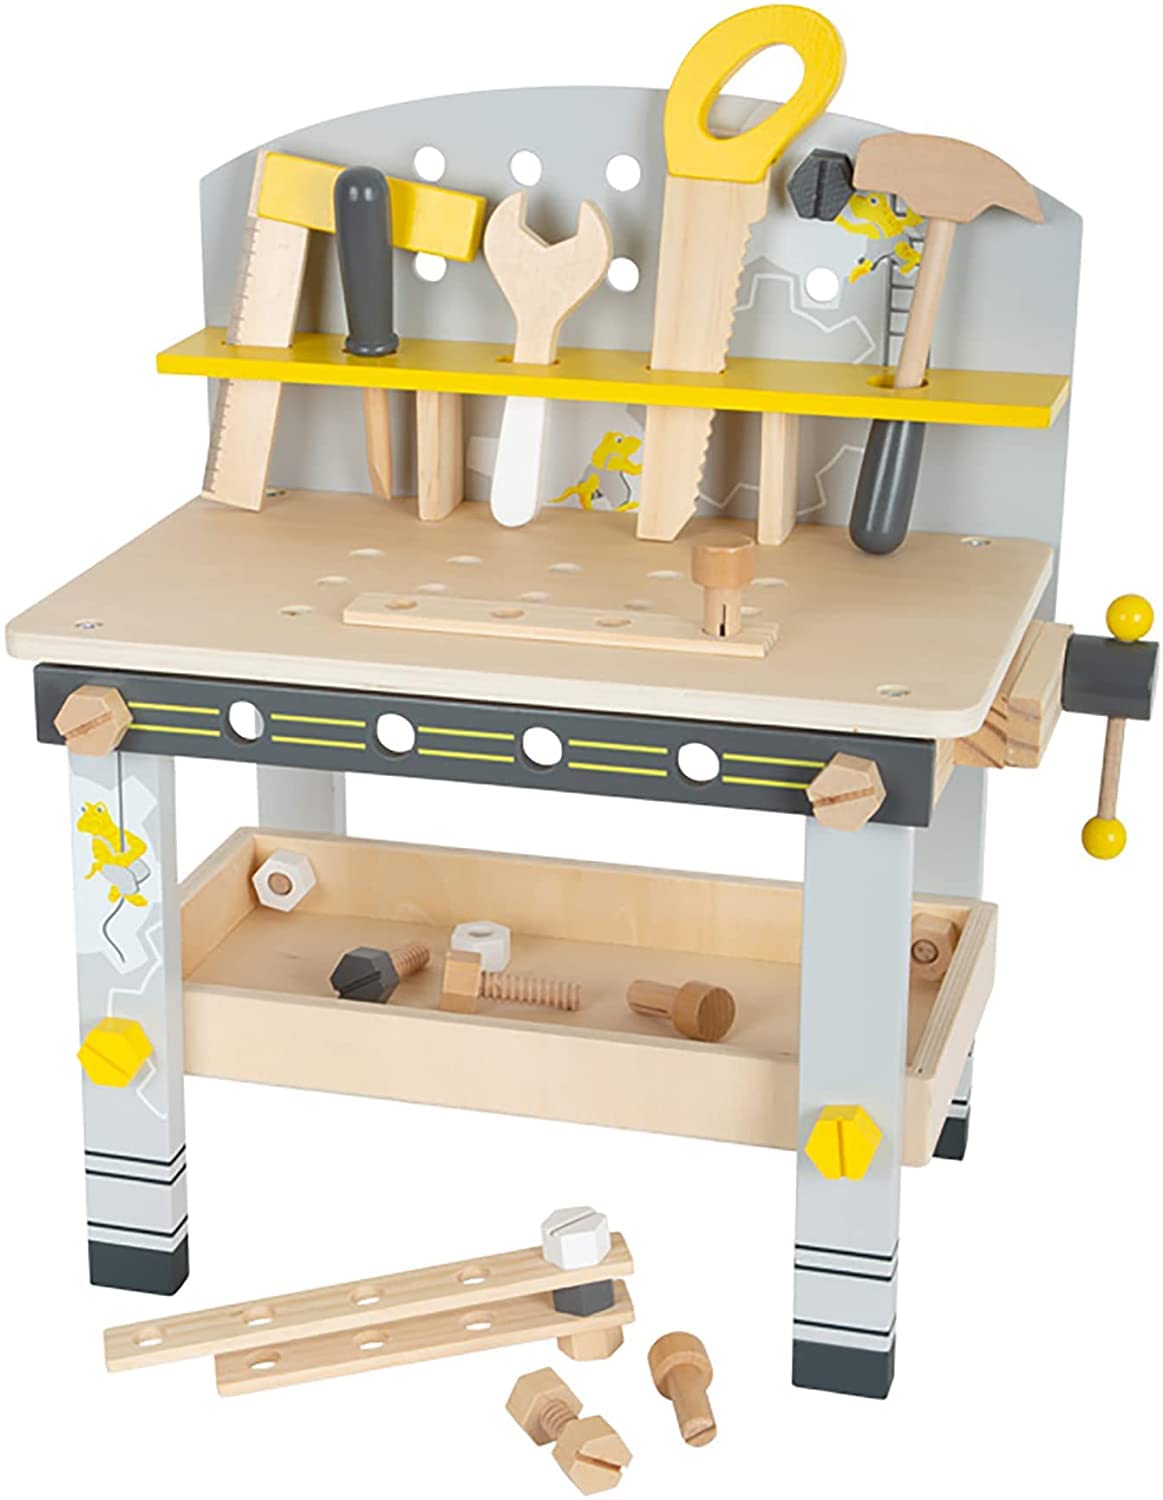 Small Foot Wooden Toys- Compact Premium Workbench Playset for Boys and Girls- Role Play Construction Set Includes 5 Wooden Tools